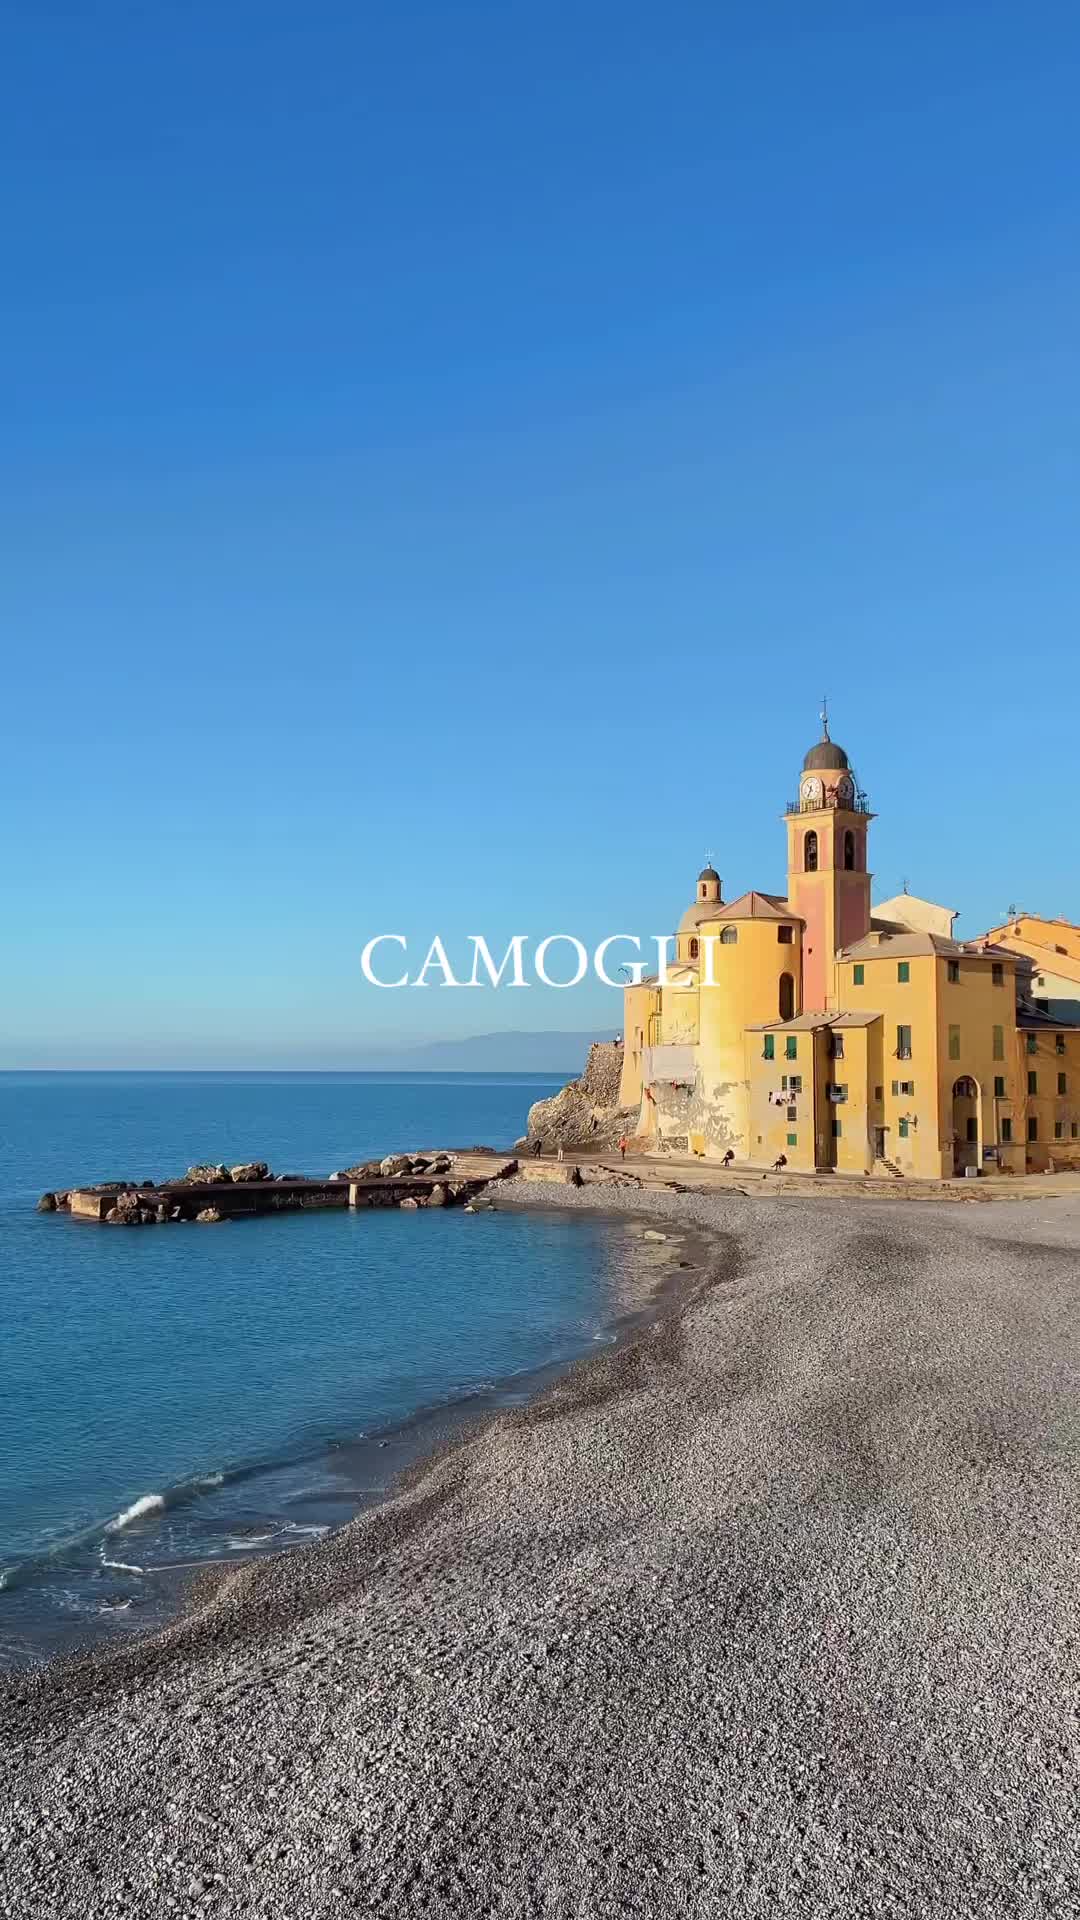 Discover the Beauty of Camogli, Italy's Hidden Gem